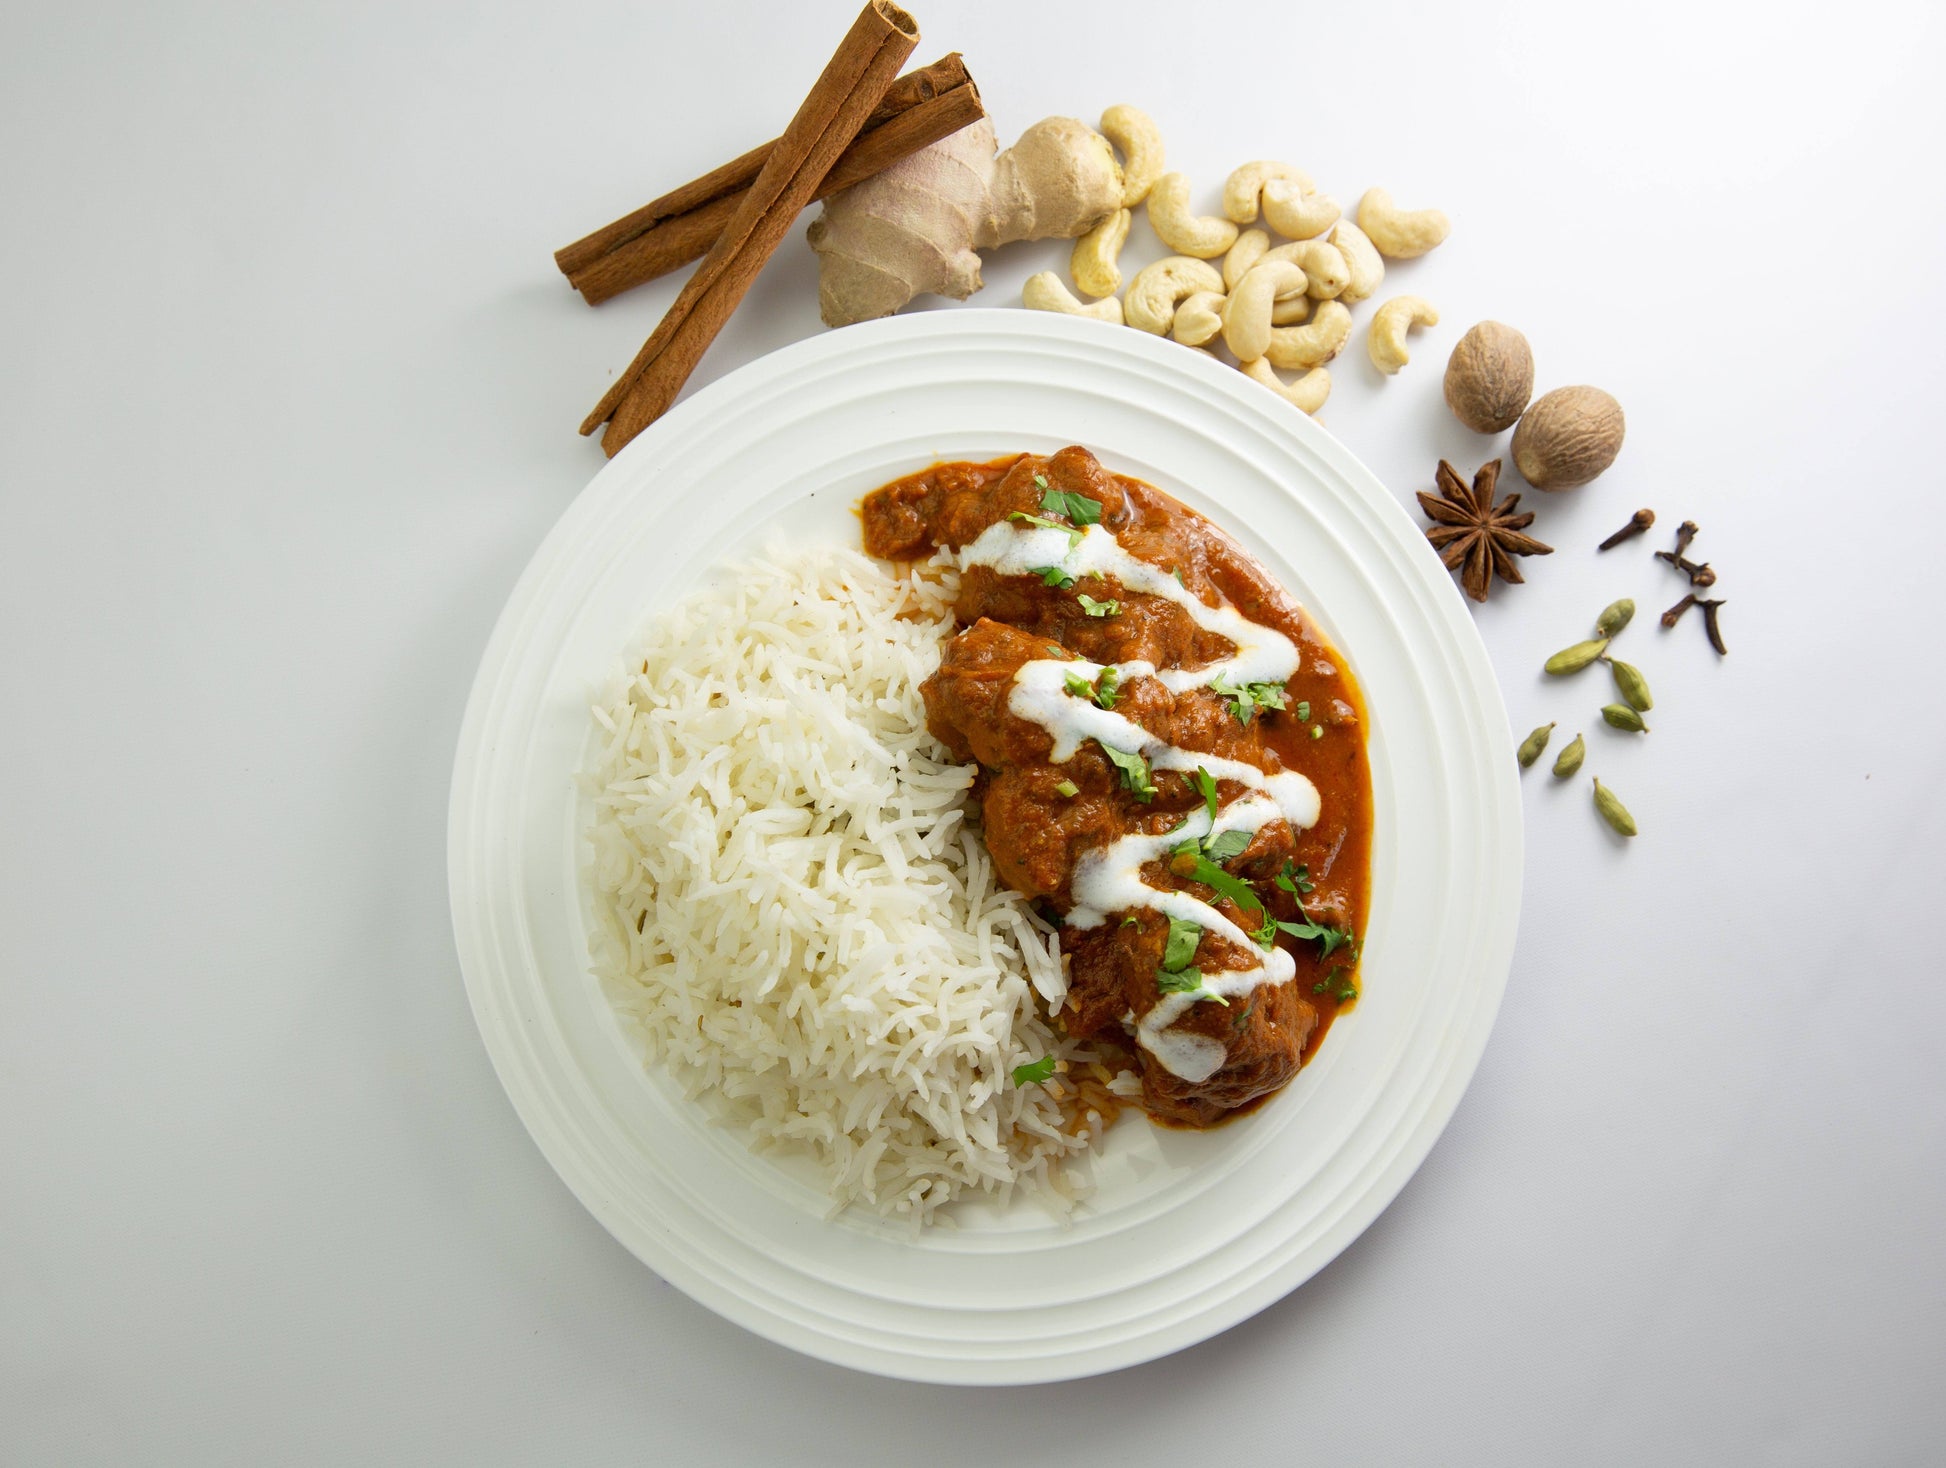 The best Butter Chicken dish with Rice made using Shivani's Butter Chicken Sauce and Spice